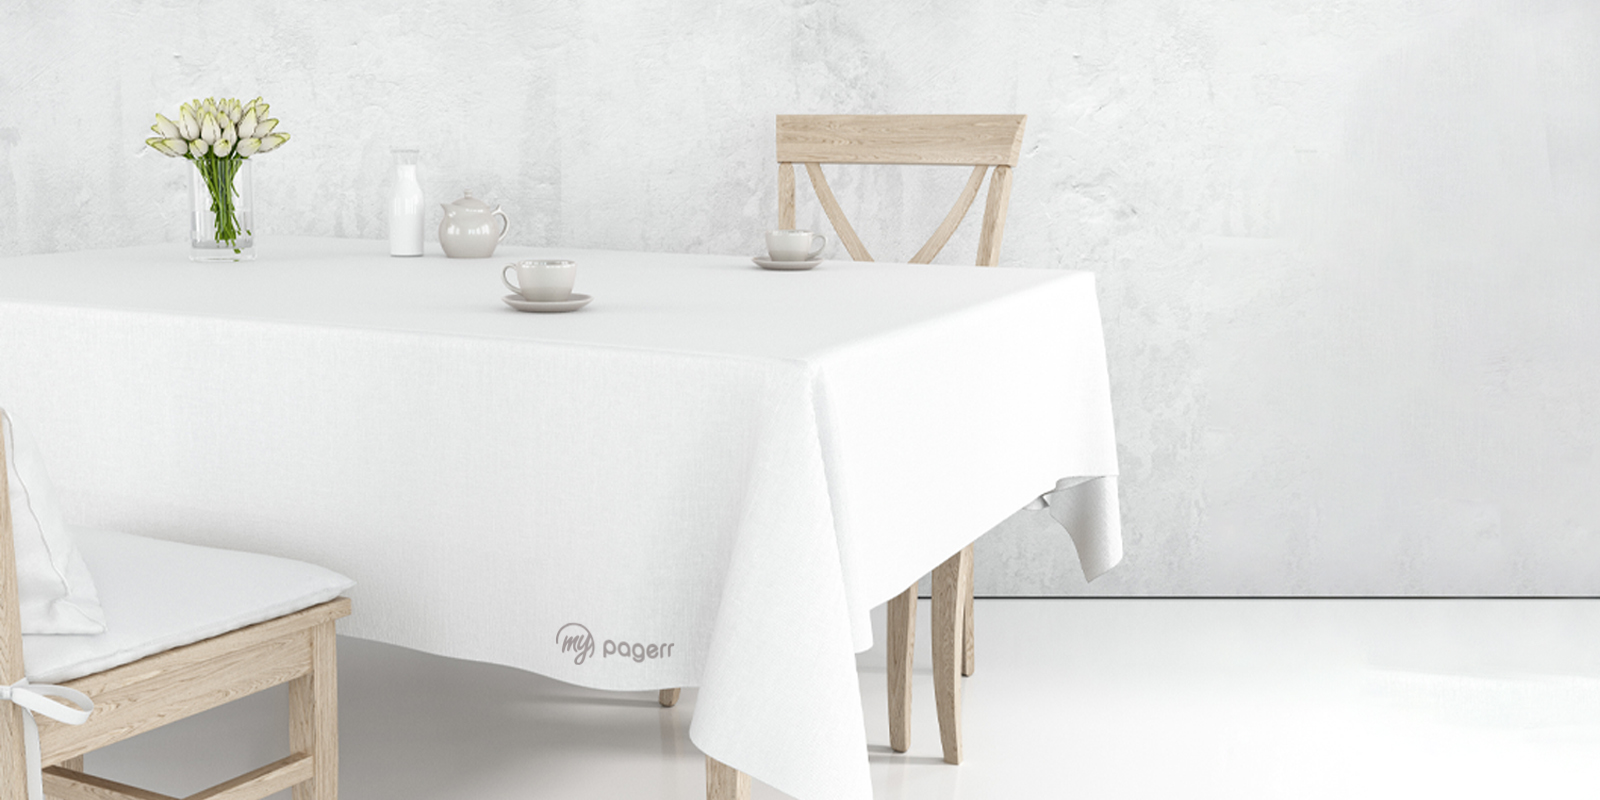 Tablecloths in Geelong - Print with Pagerr